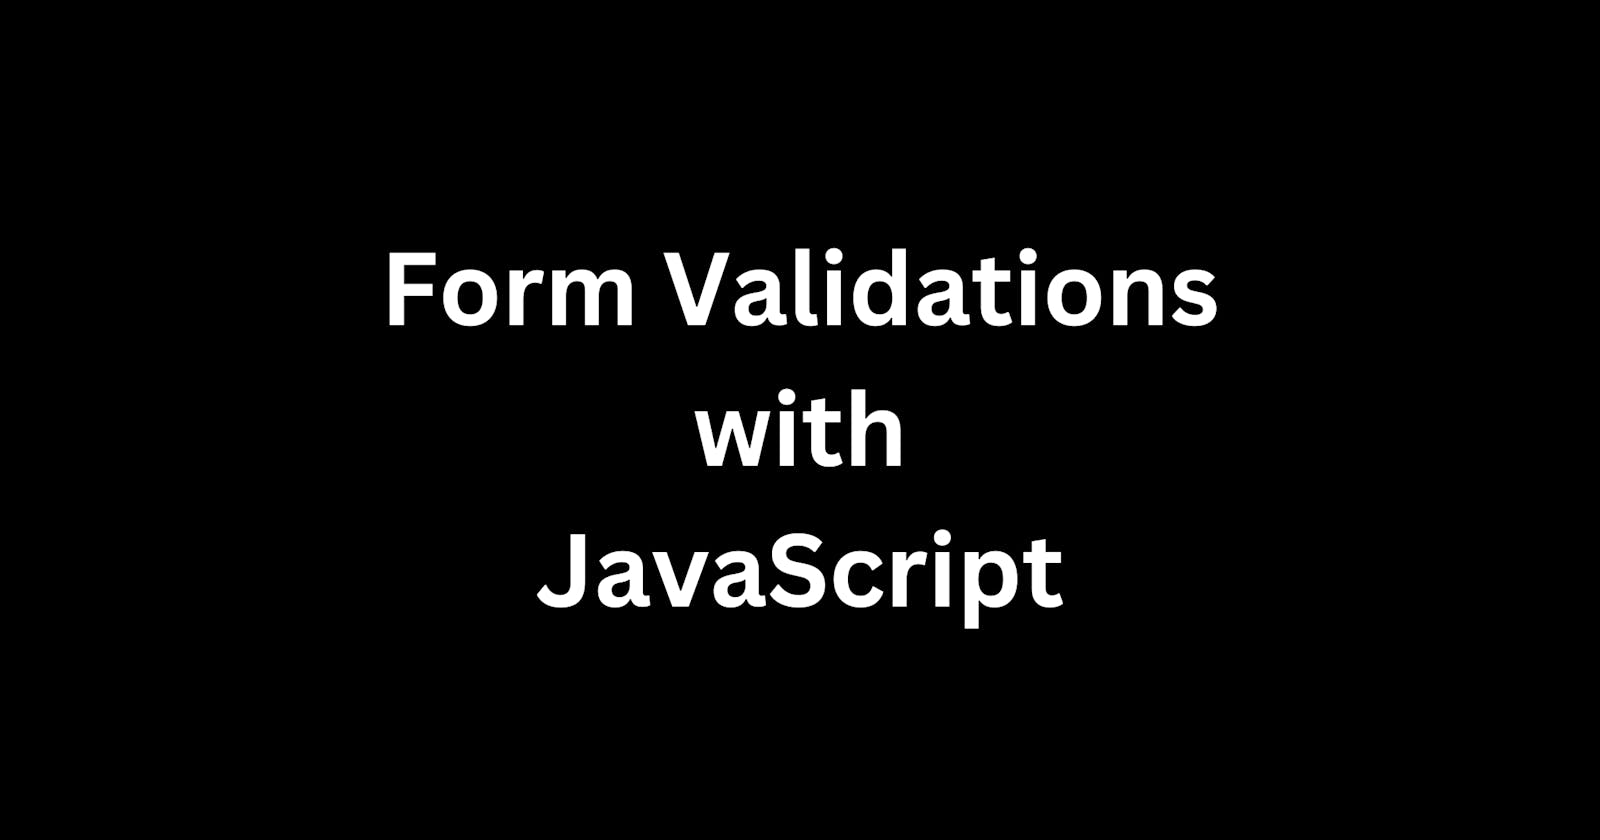 Client-Side Form Validations with HTML and JavaScript: Part 2